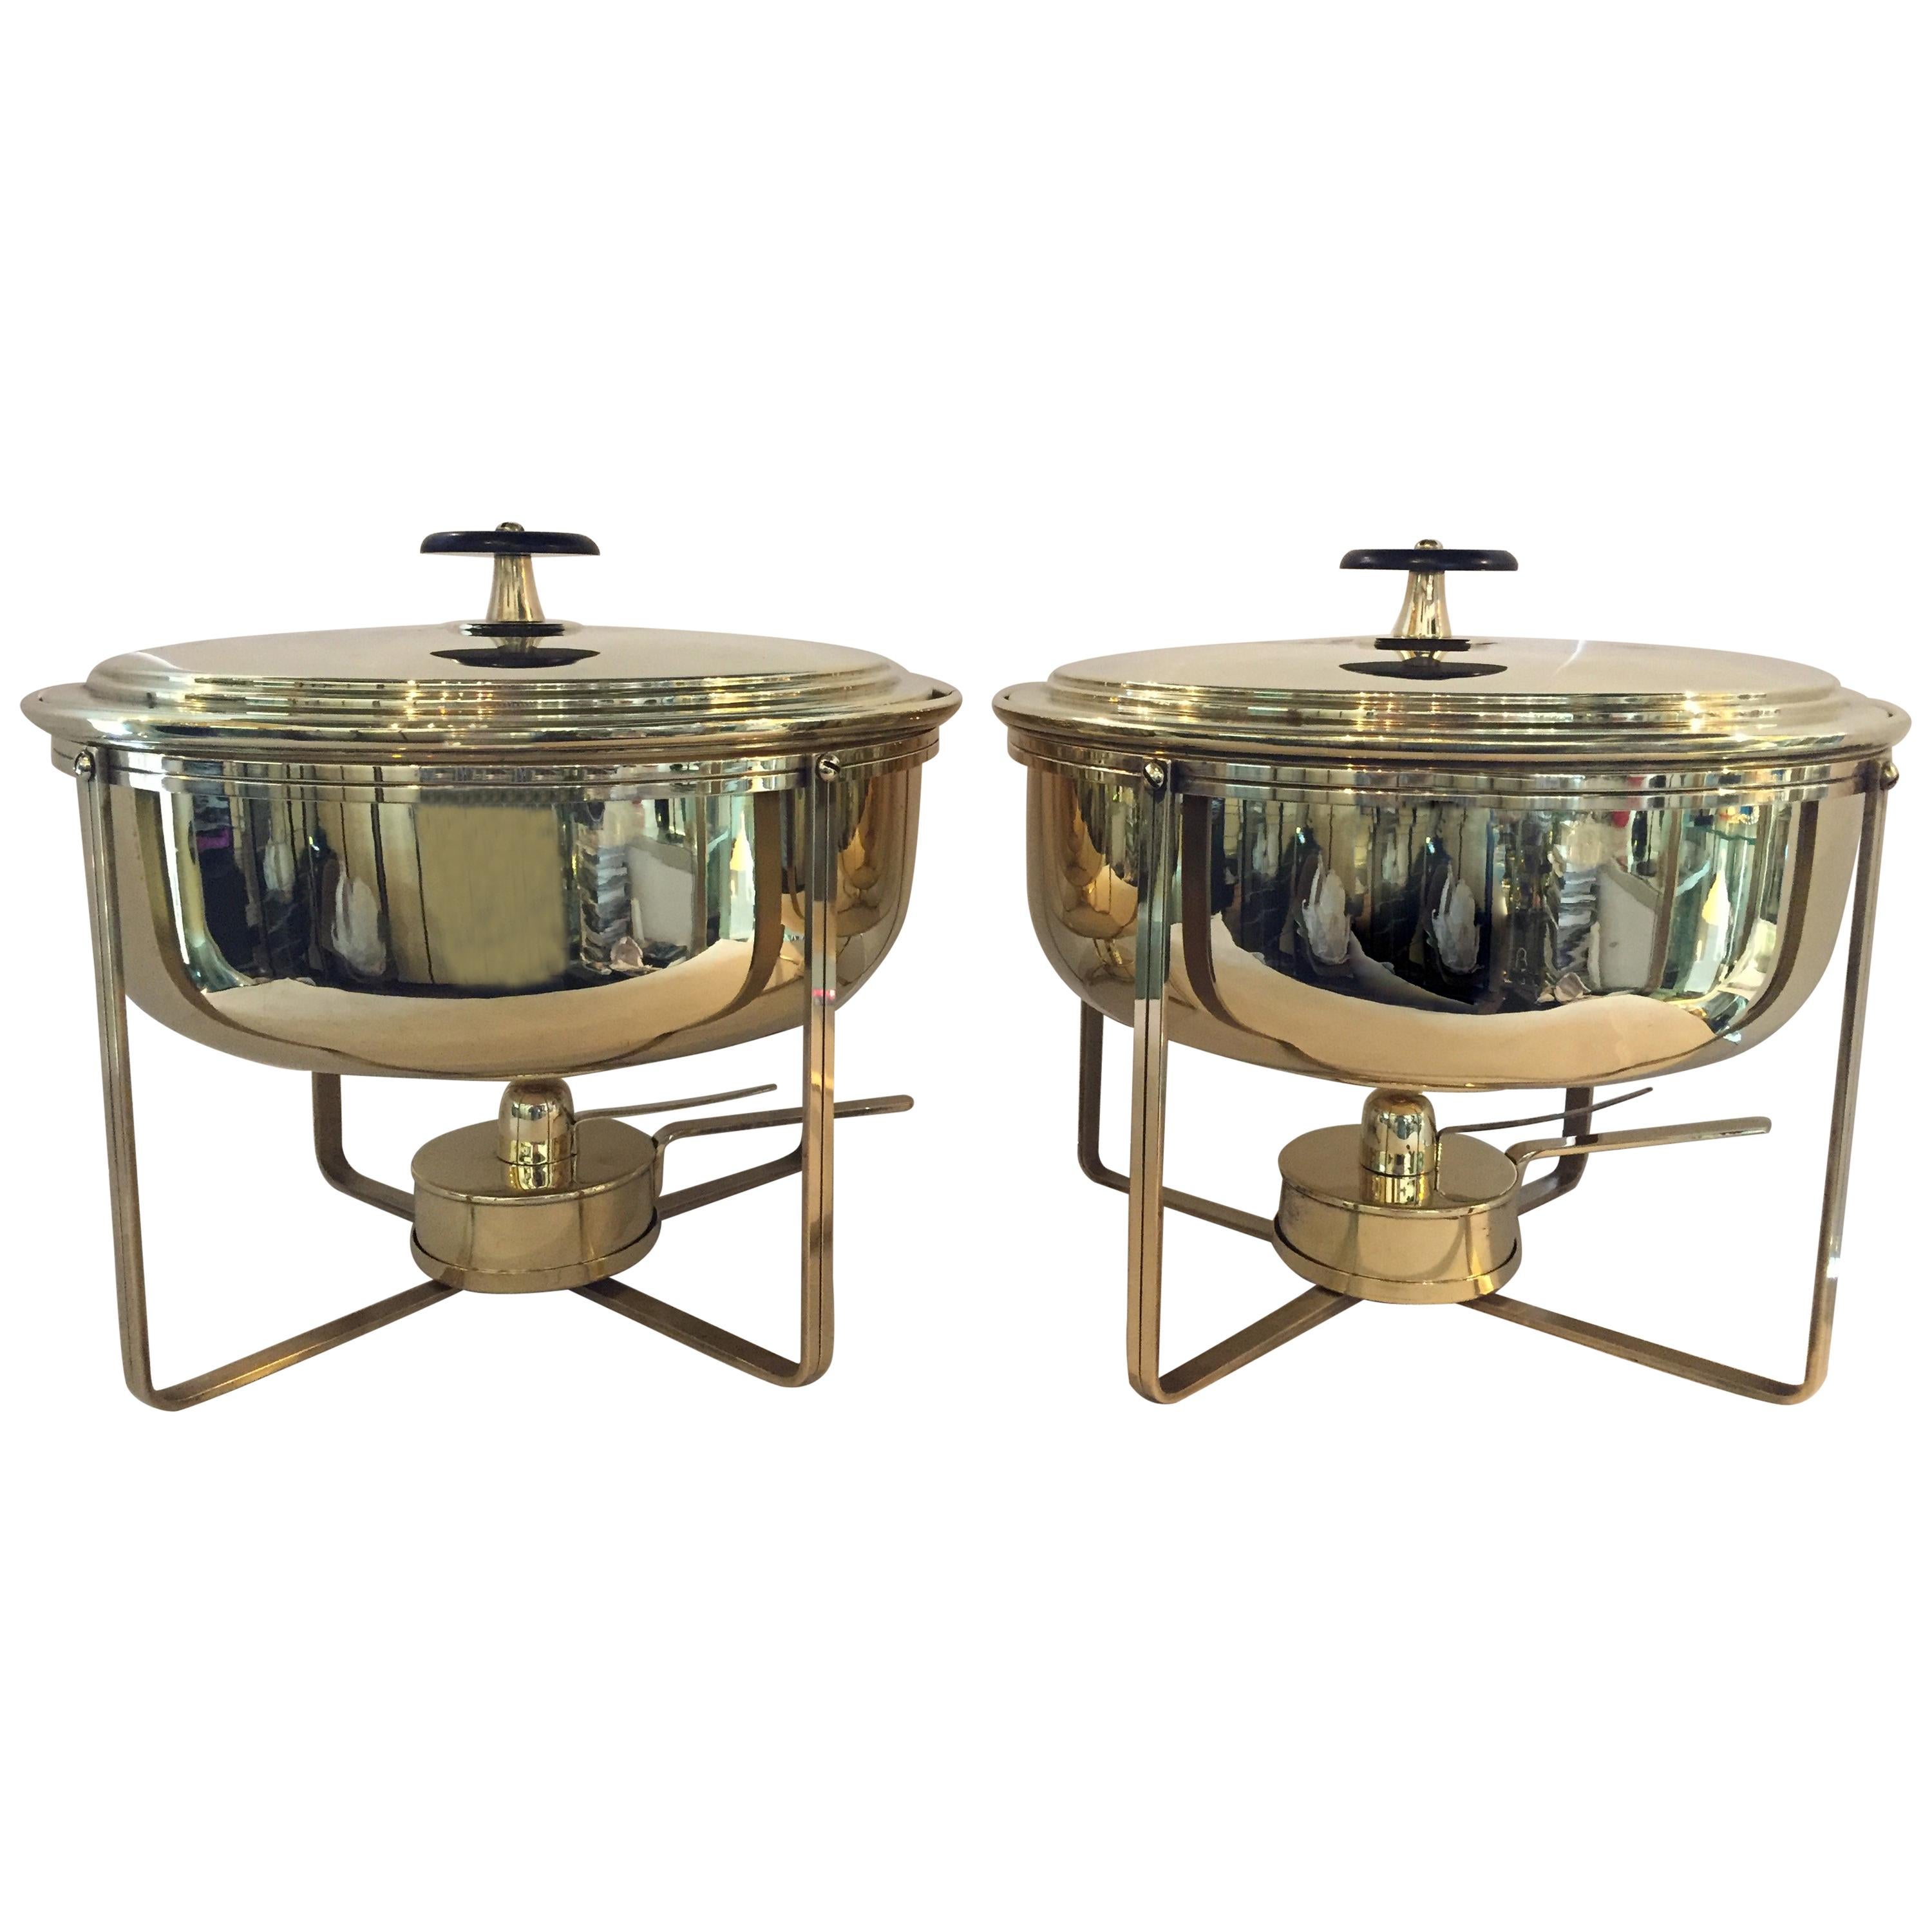 Pair of Tommi Parzinger Brass Dorlyn Silversmiths Chafing Dishes